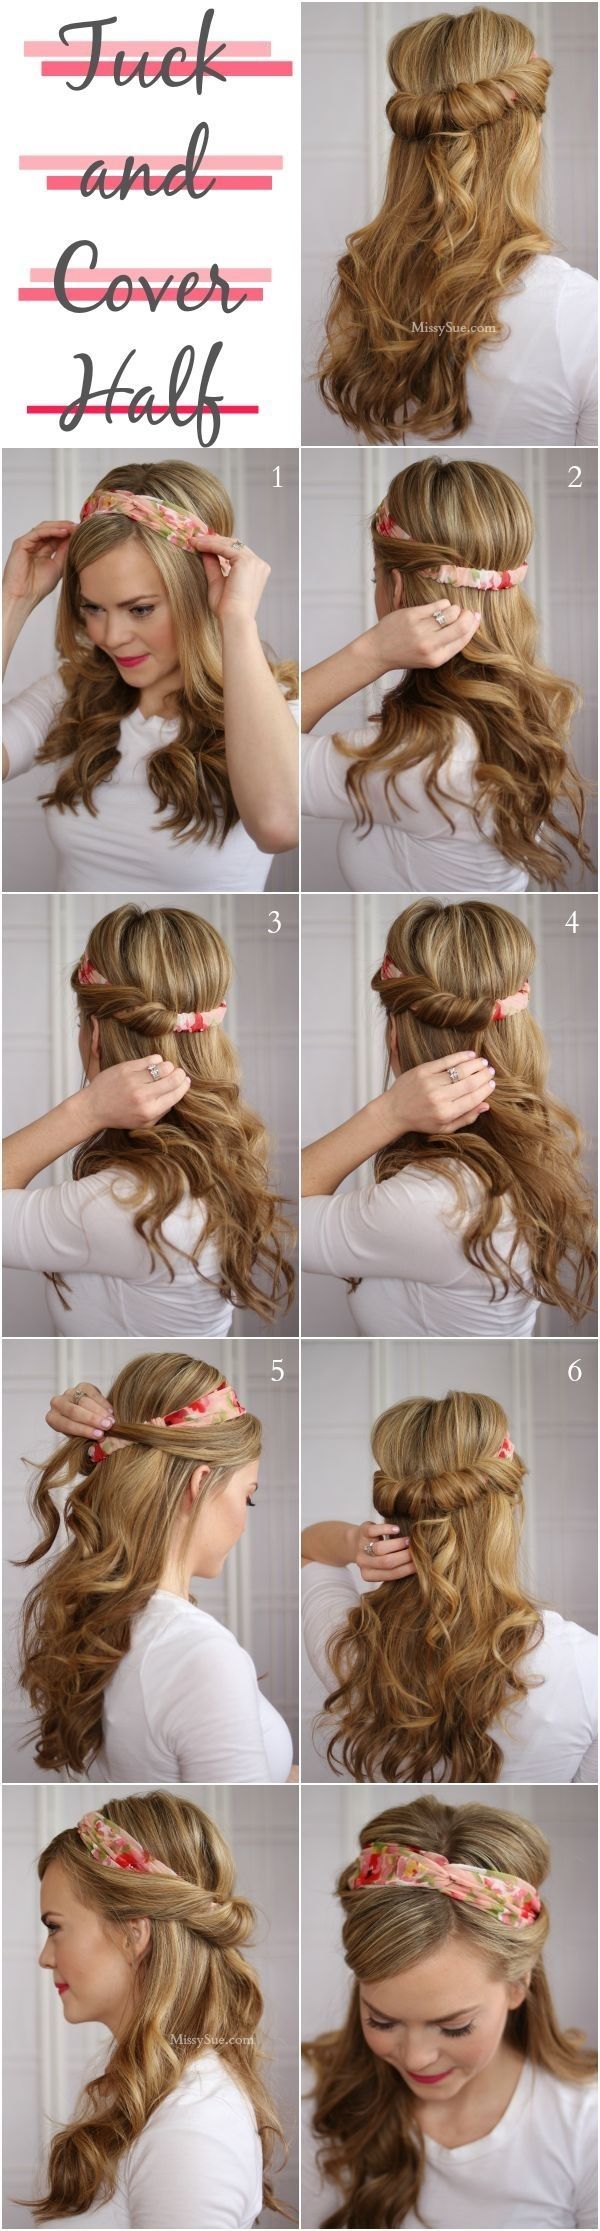 The Half Tuck | Easy and Cute Hairstyles For Long Hair and For Medium Hair by Ma...